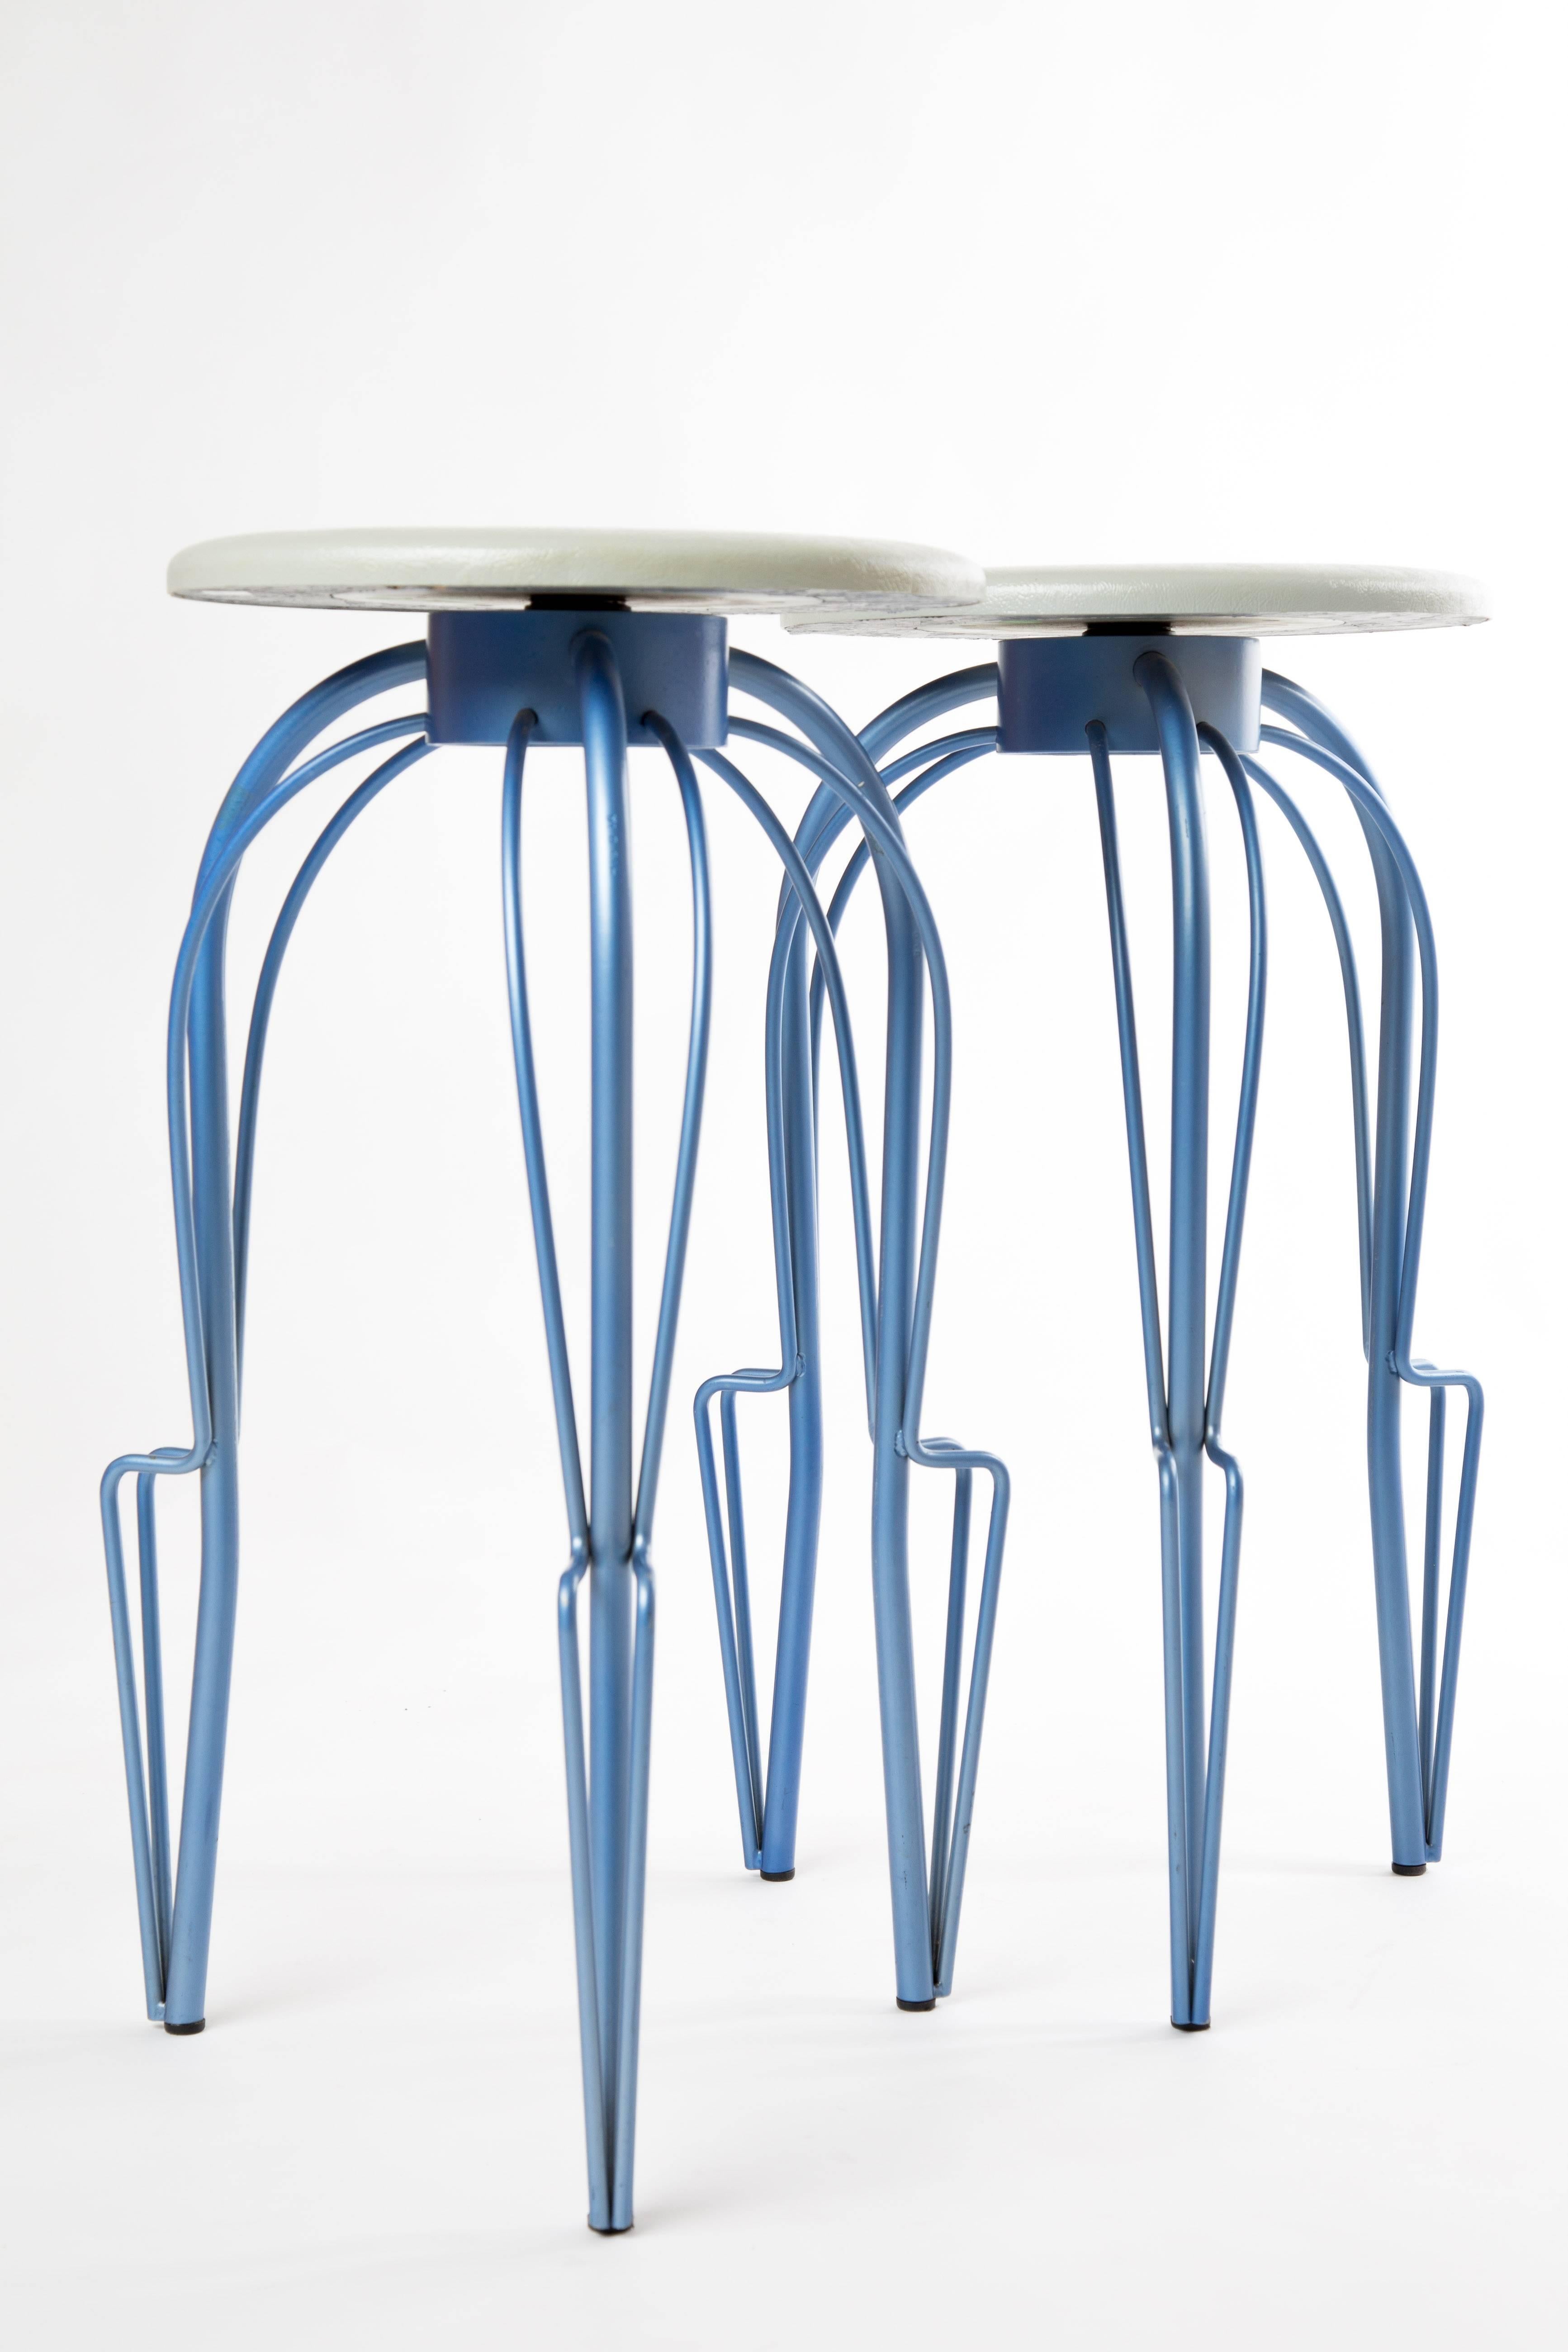 Borek Sipek Savarin bar chairs. Two bar chairs designed in 2001 by Borek Sipek. He designed the seating with a joke. The seating looks like a padded seating, but without buttons. The chairs are made by Sipeks own company 